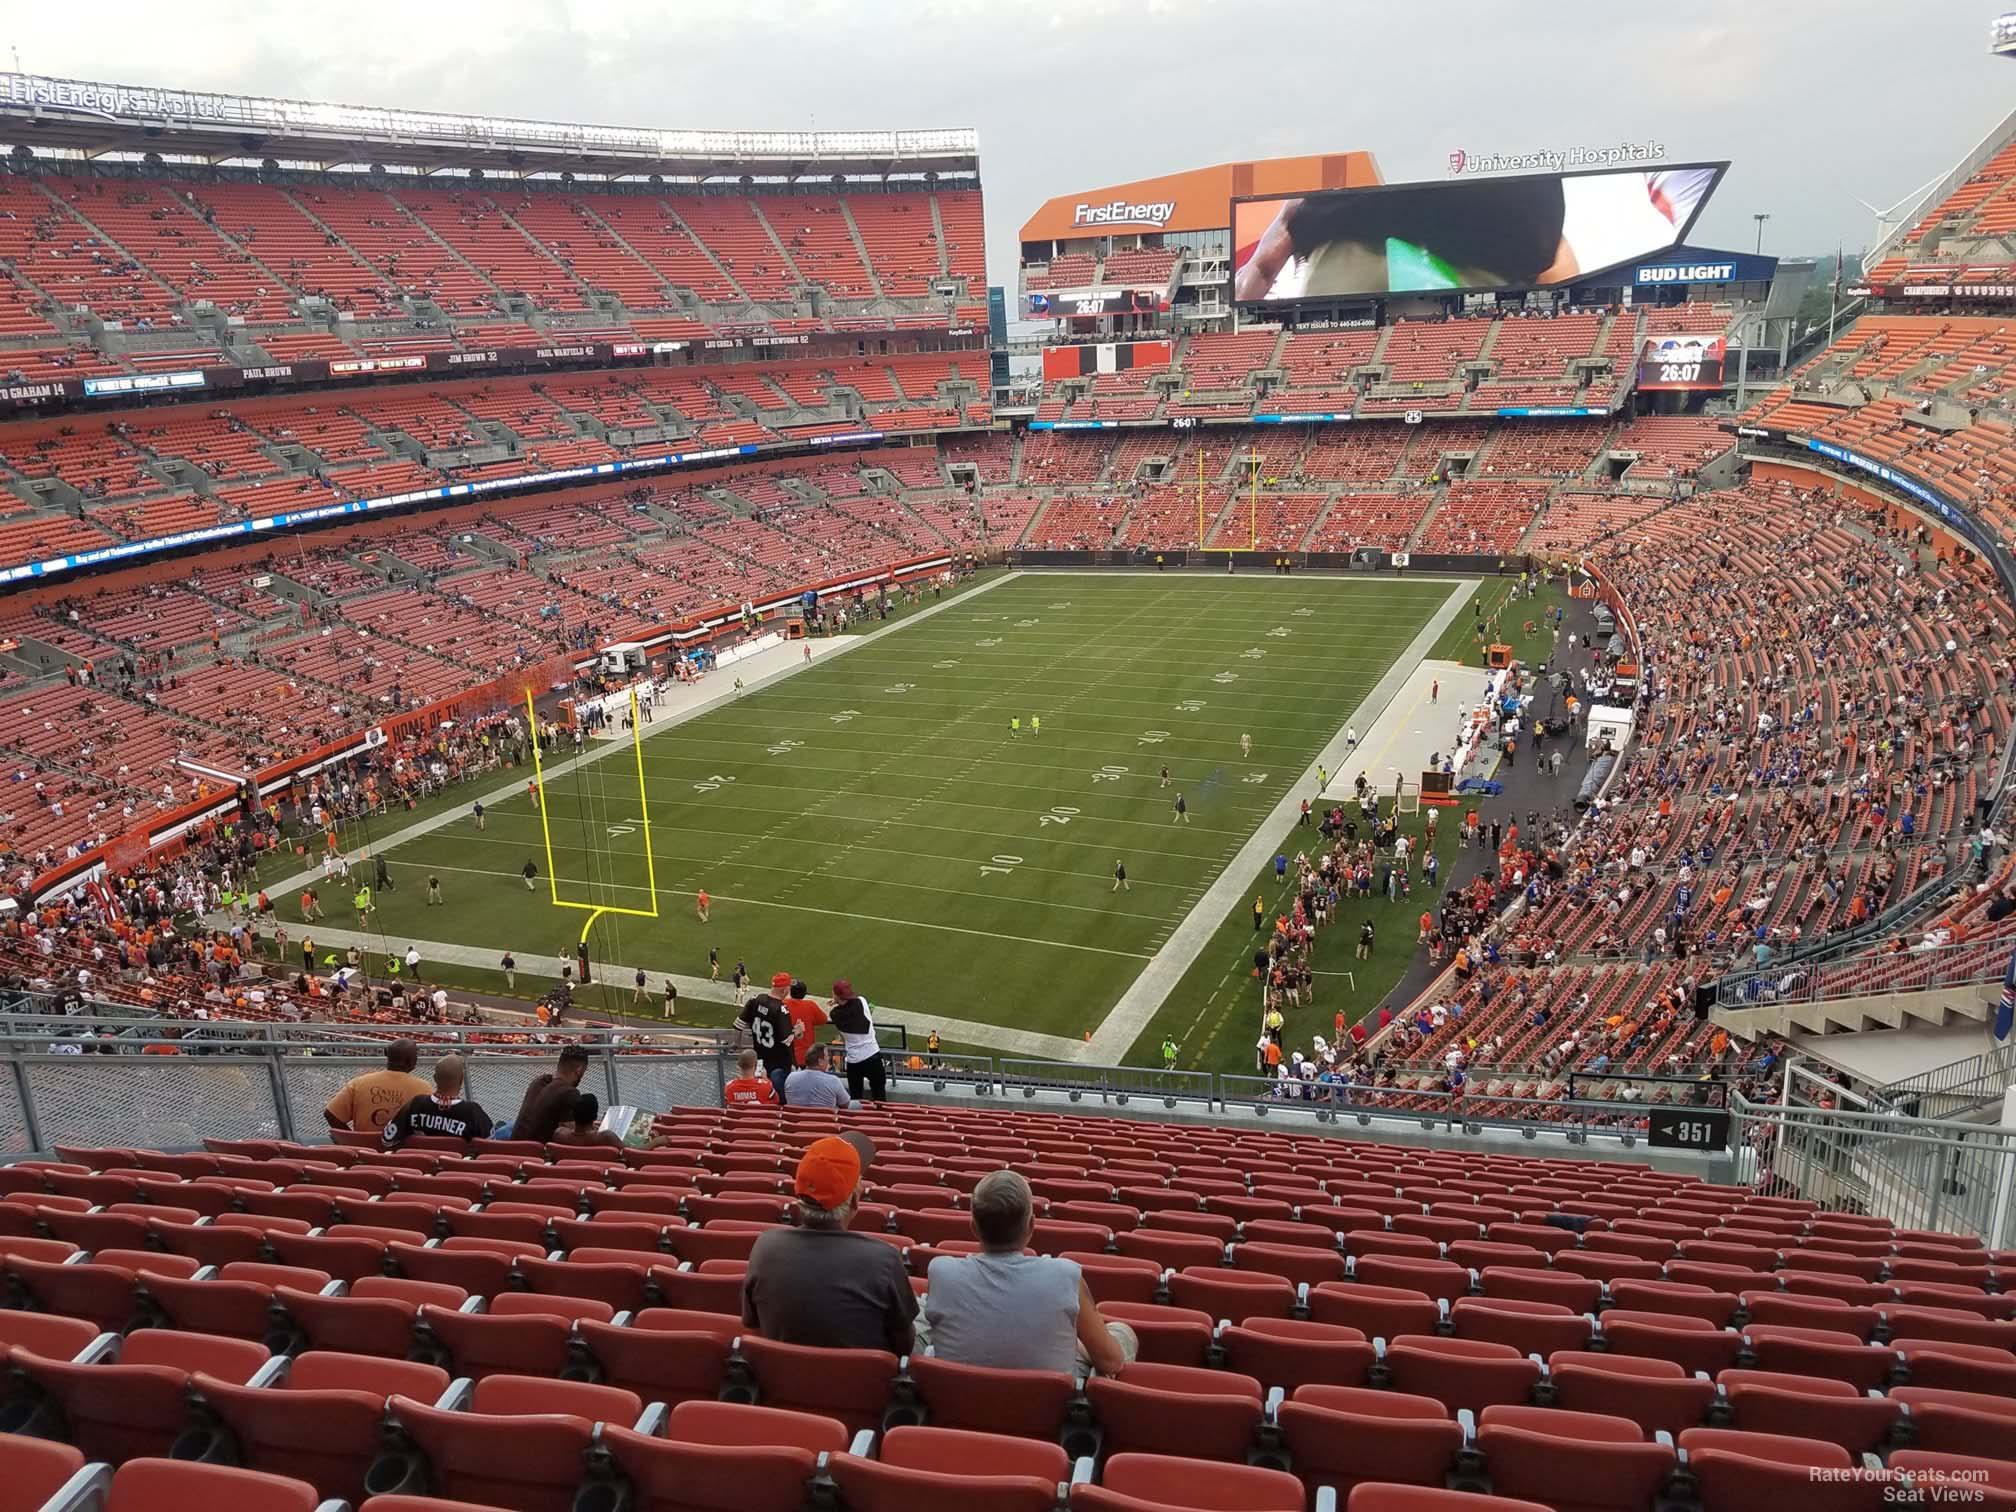 section 351, row 18 seat view  - cleveland browns stadium